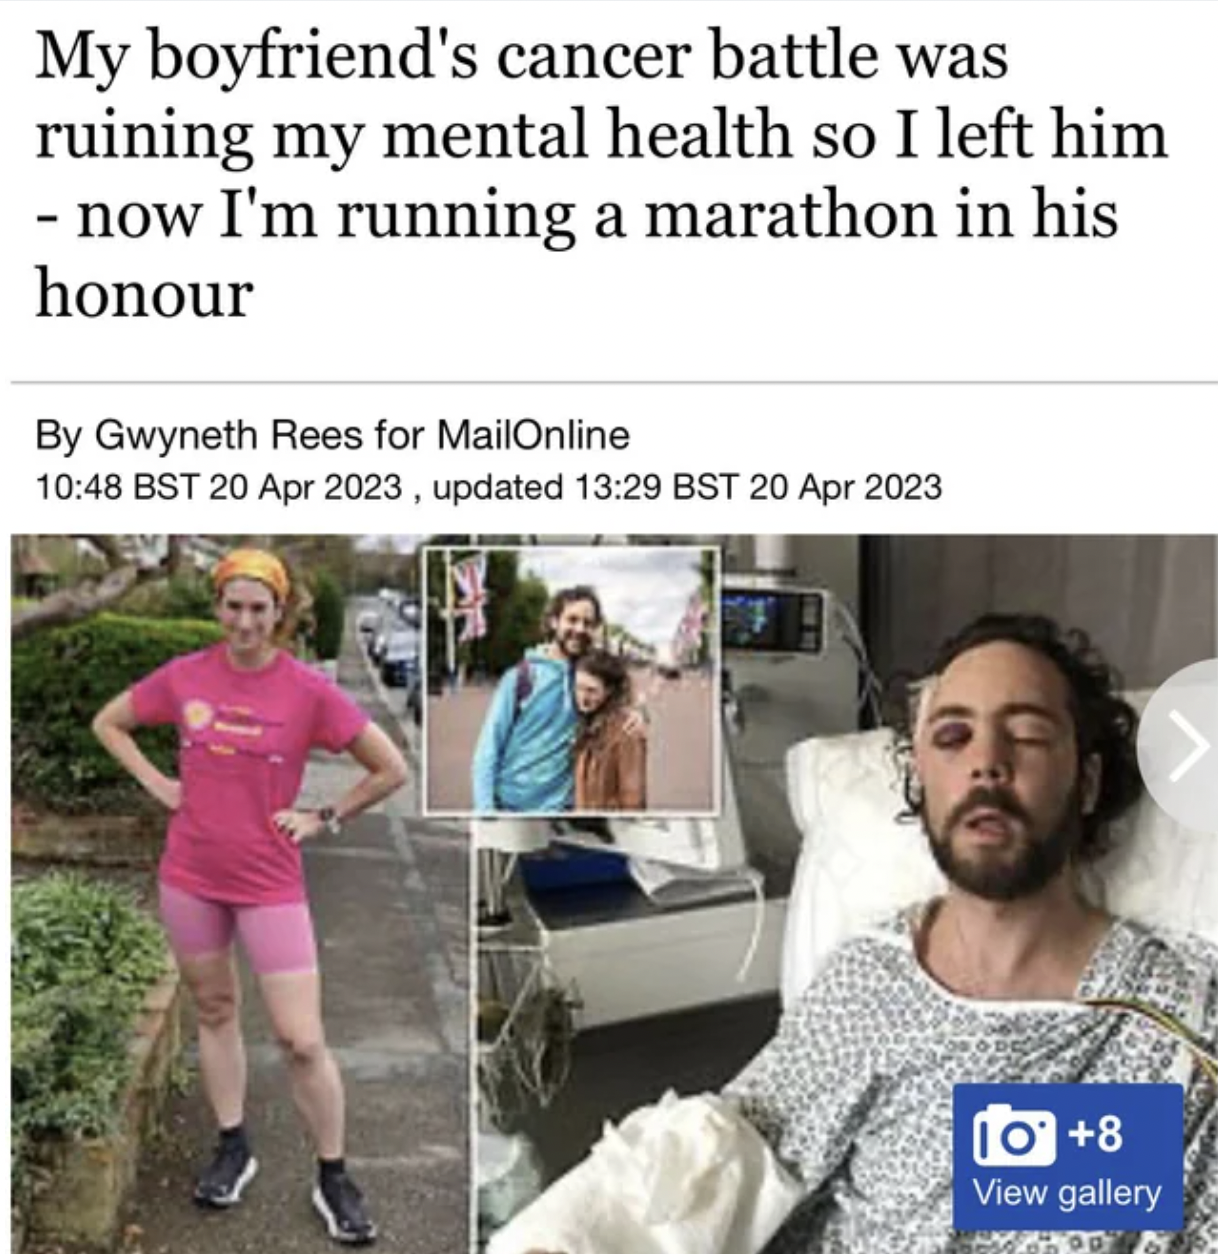 quotes - My boyfriend's cancer battle was ruining my mental health so I left him now I'm running a marathon in his